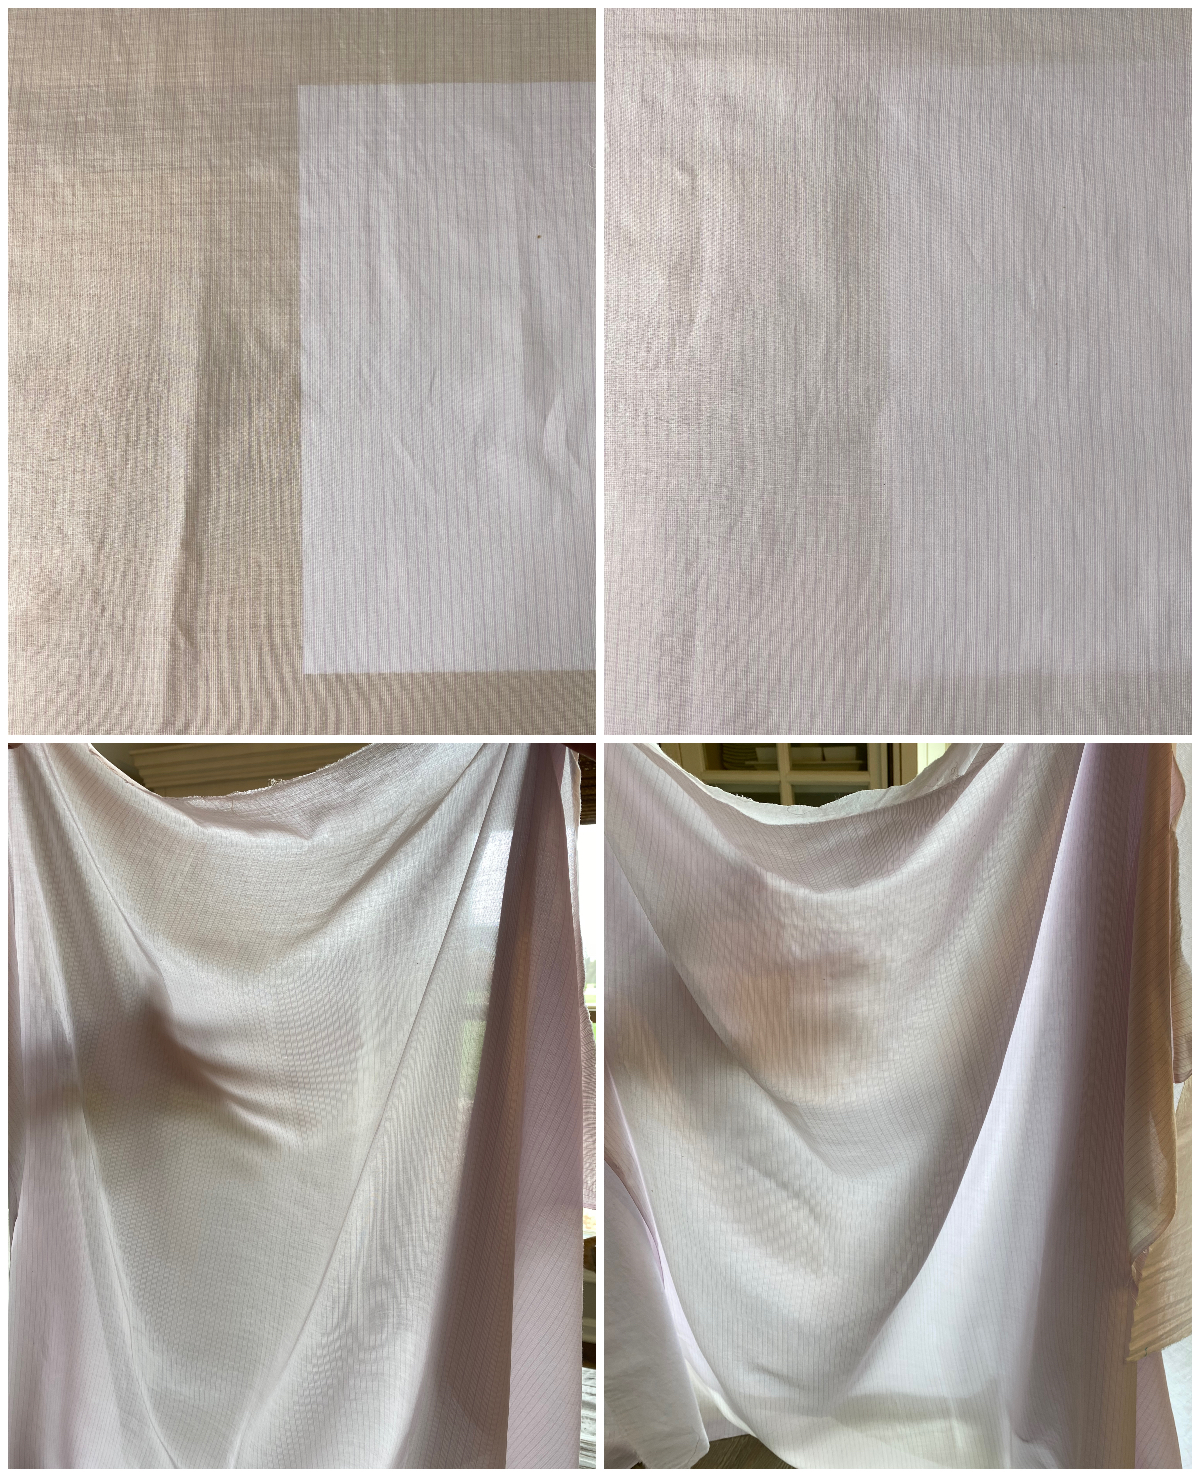 How to sew with sheer fabrics